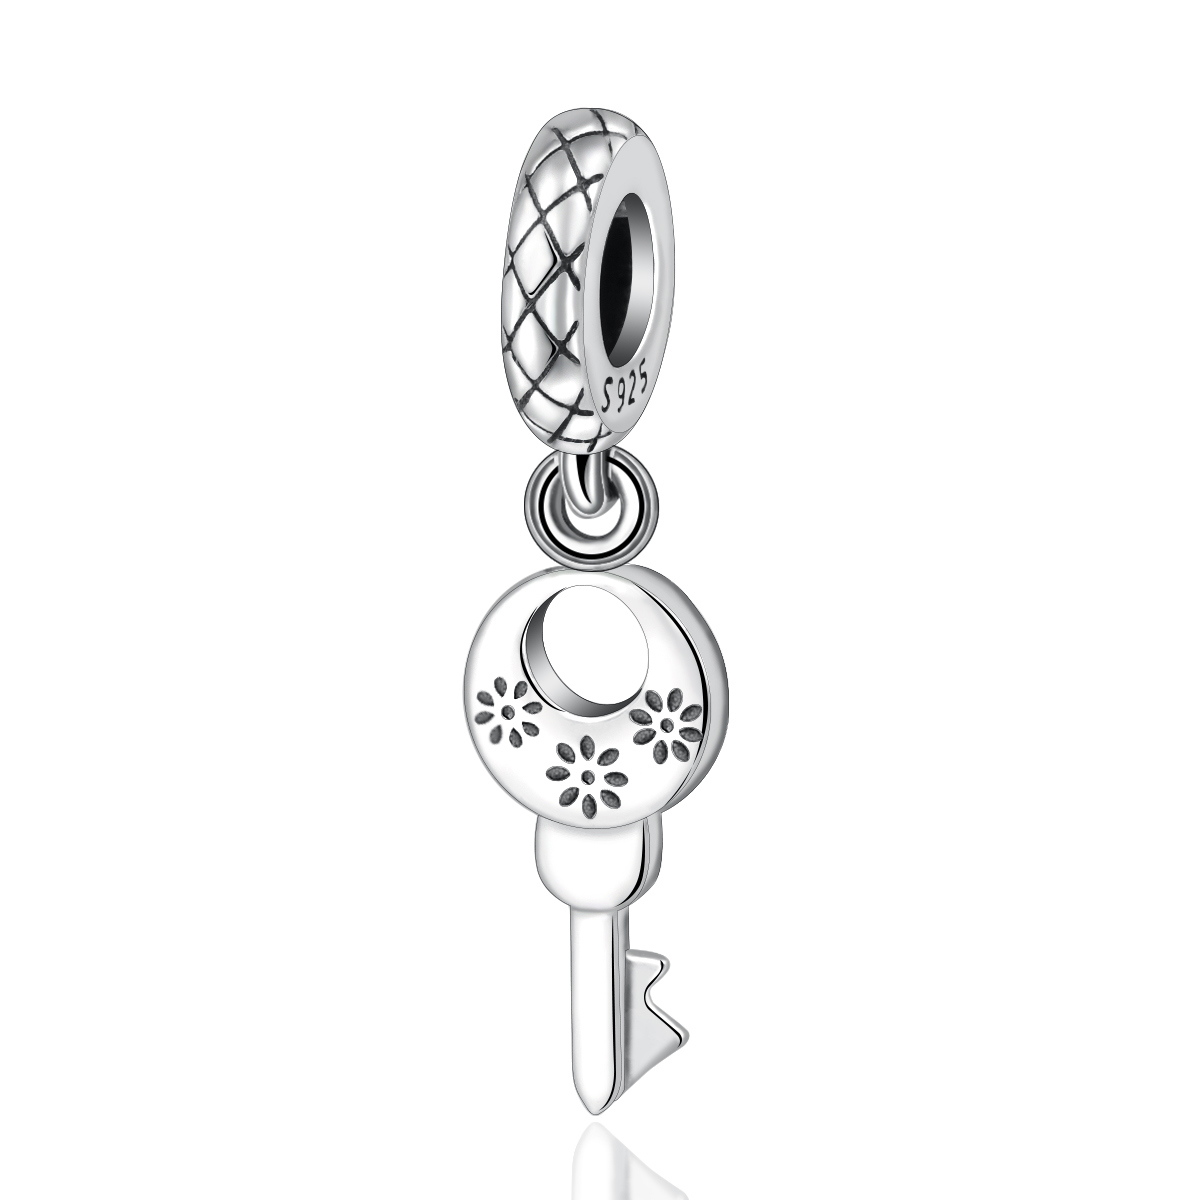 Unlock Elegance with Vintage Key 925 Sterling Silver Charms by Merryshine Jewelry